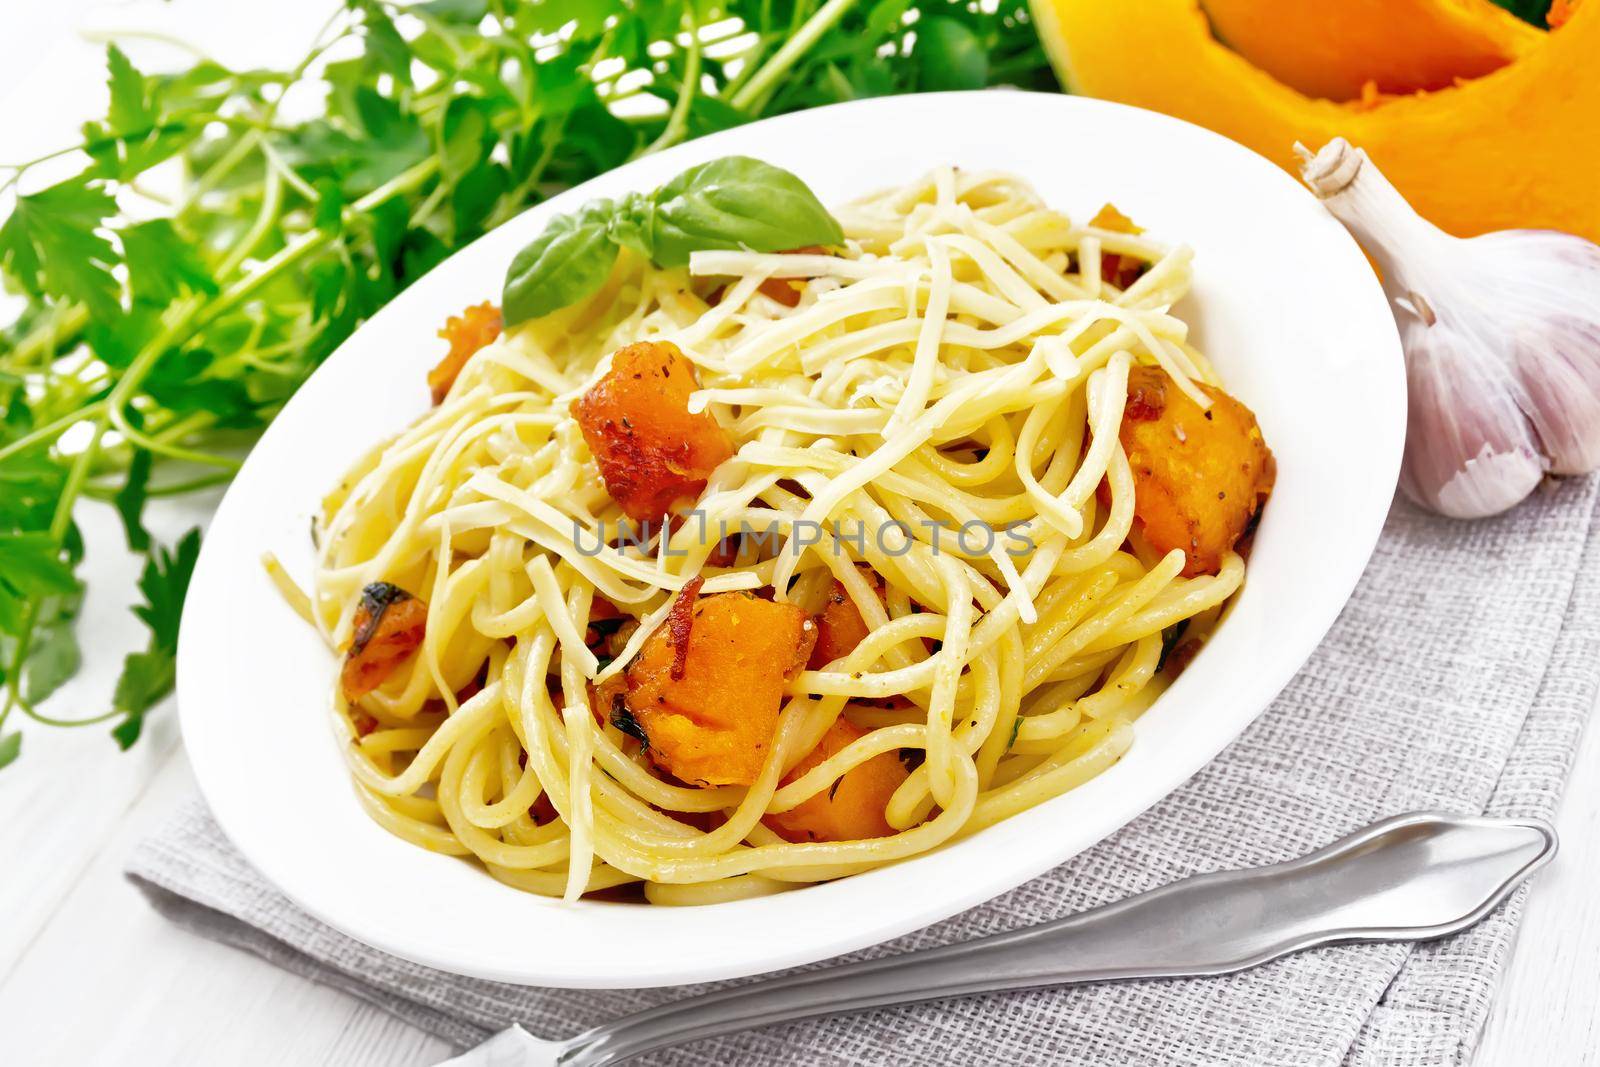 Spaghetti with pumpkin, onion and garlic in a plate on a napkin, basil, parsley and fork on white wooden board background